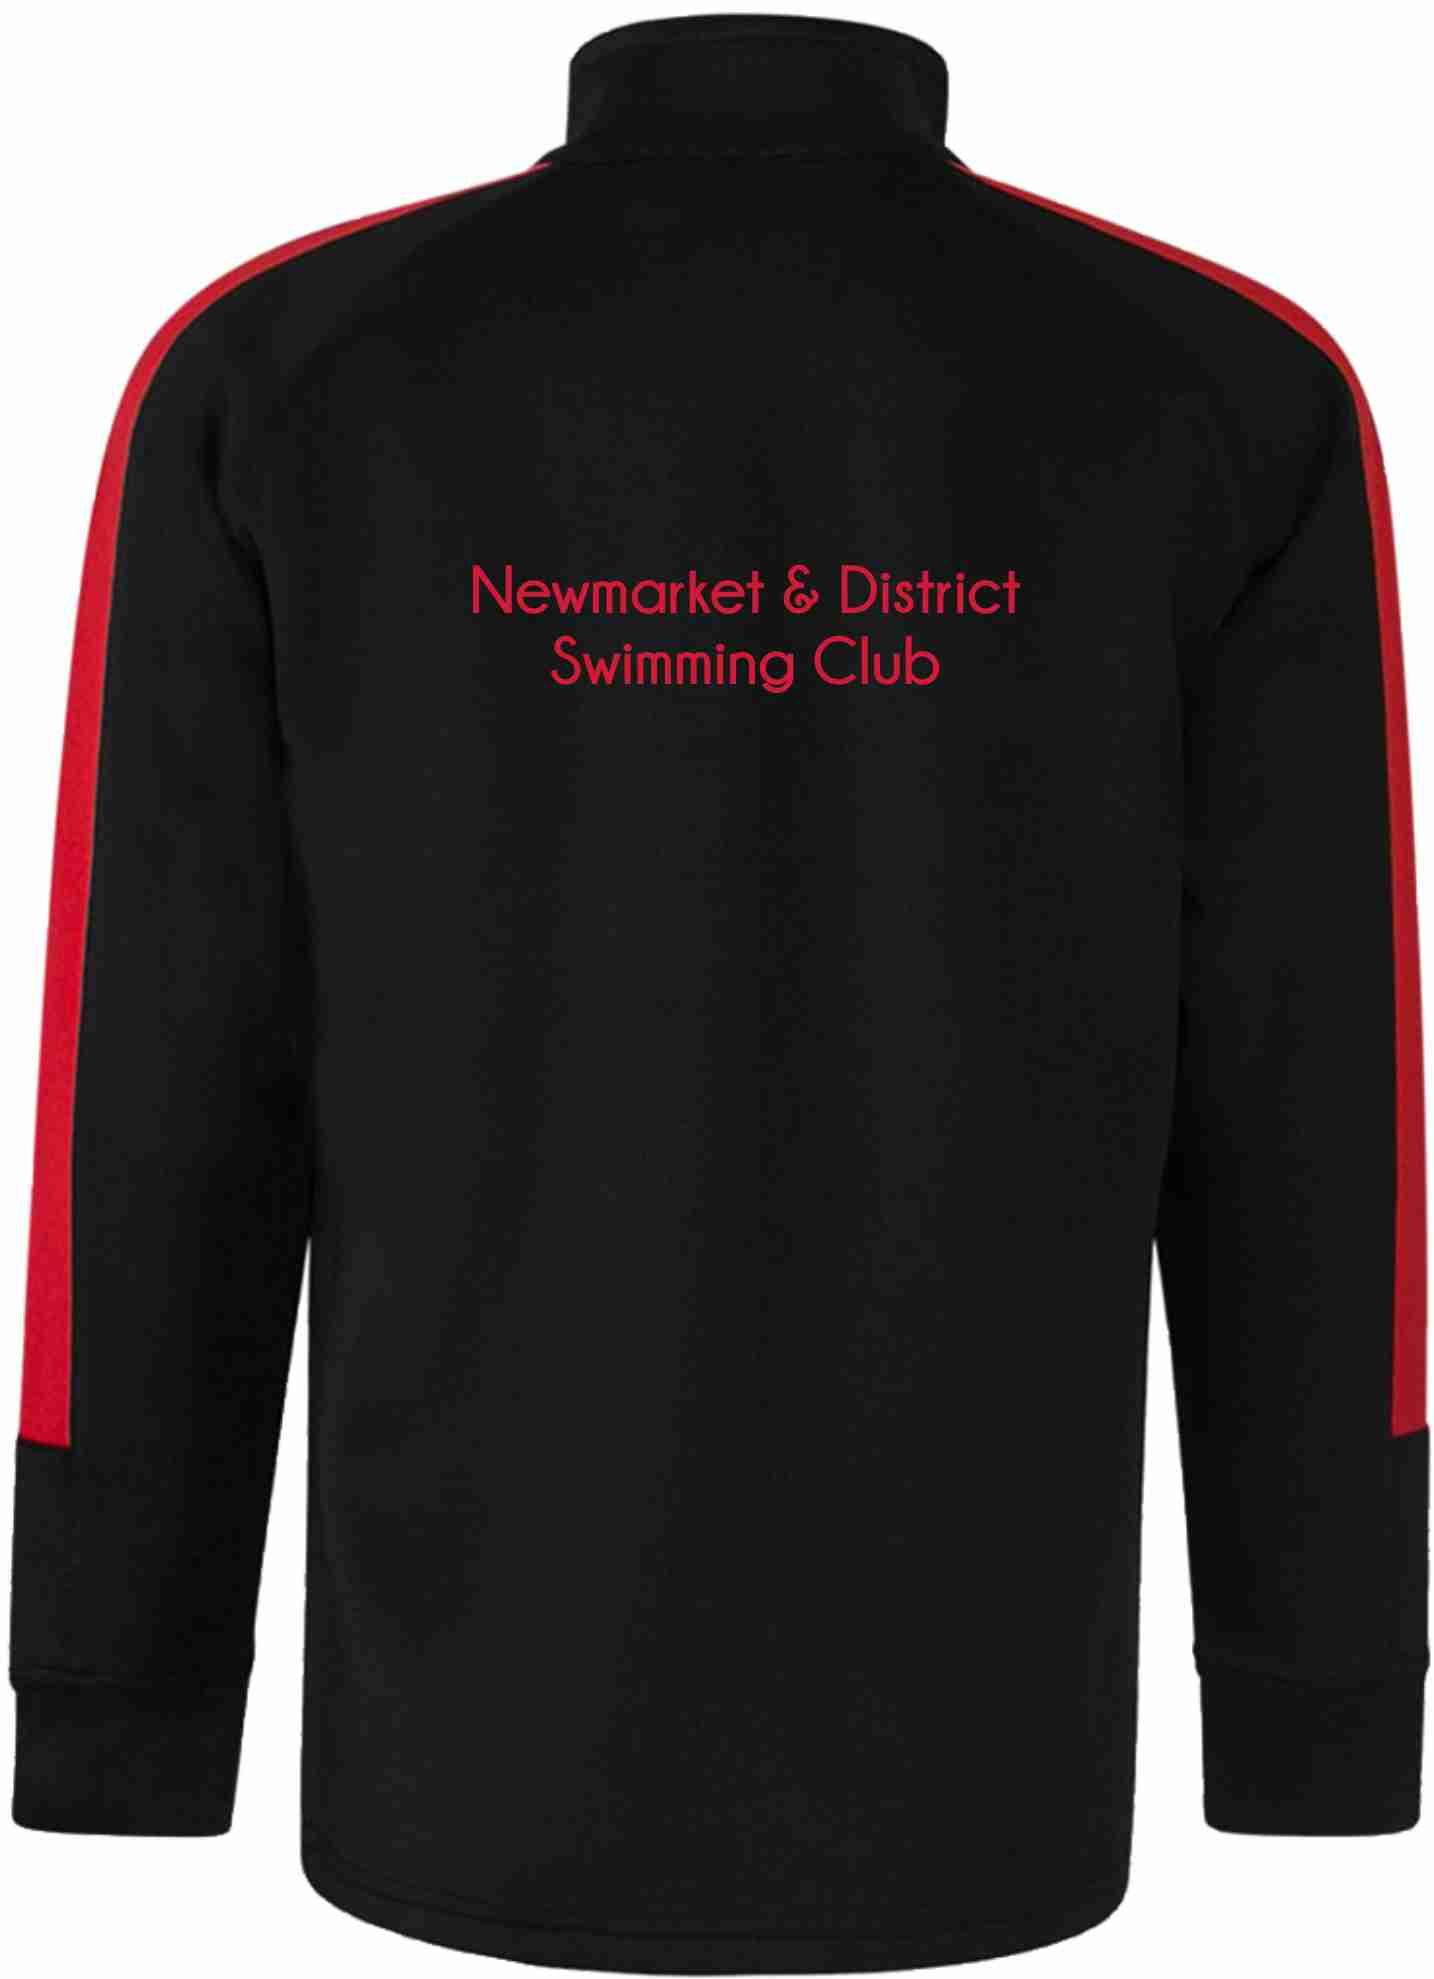 Newmarket and District Swimming Club – Zipped Tracksuit Top Kids